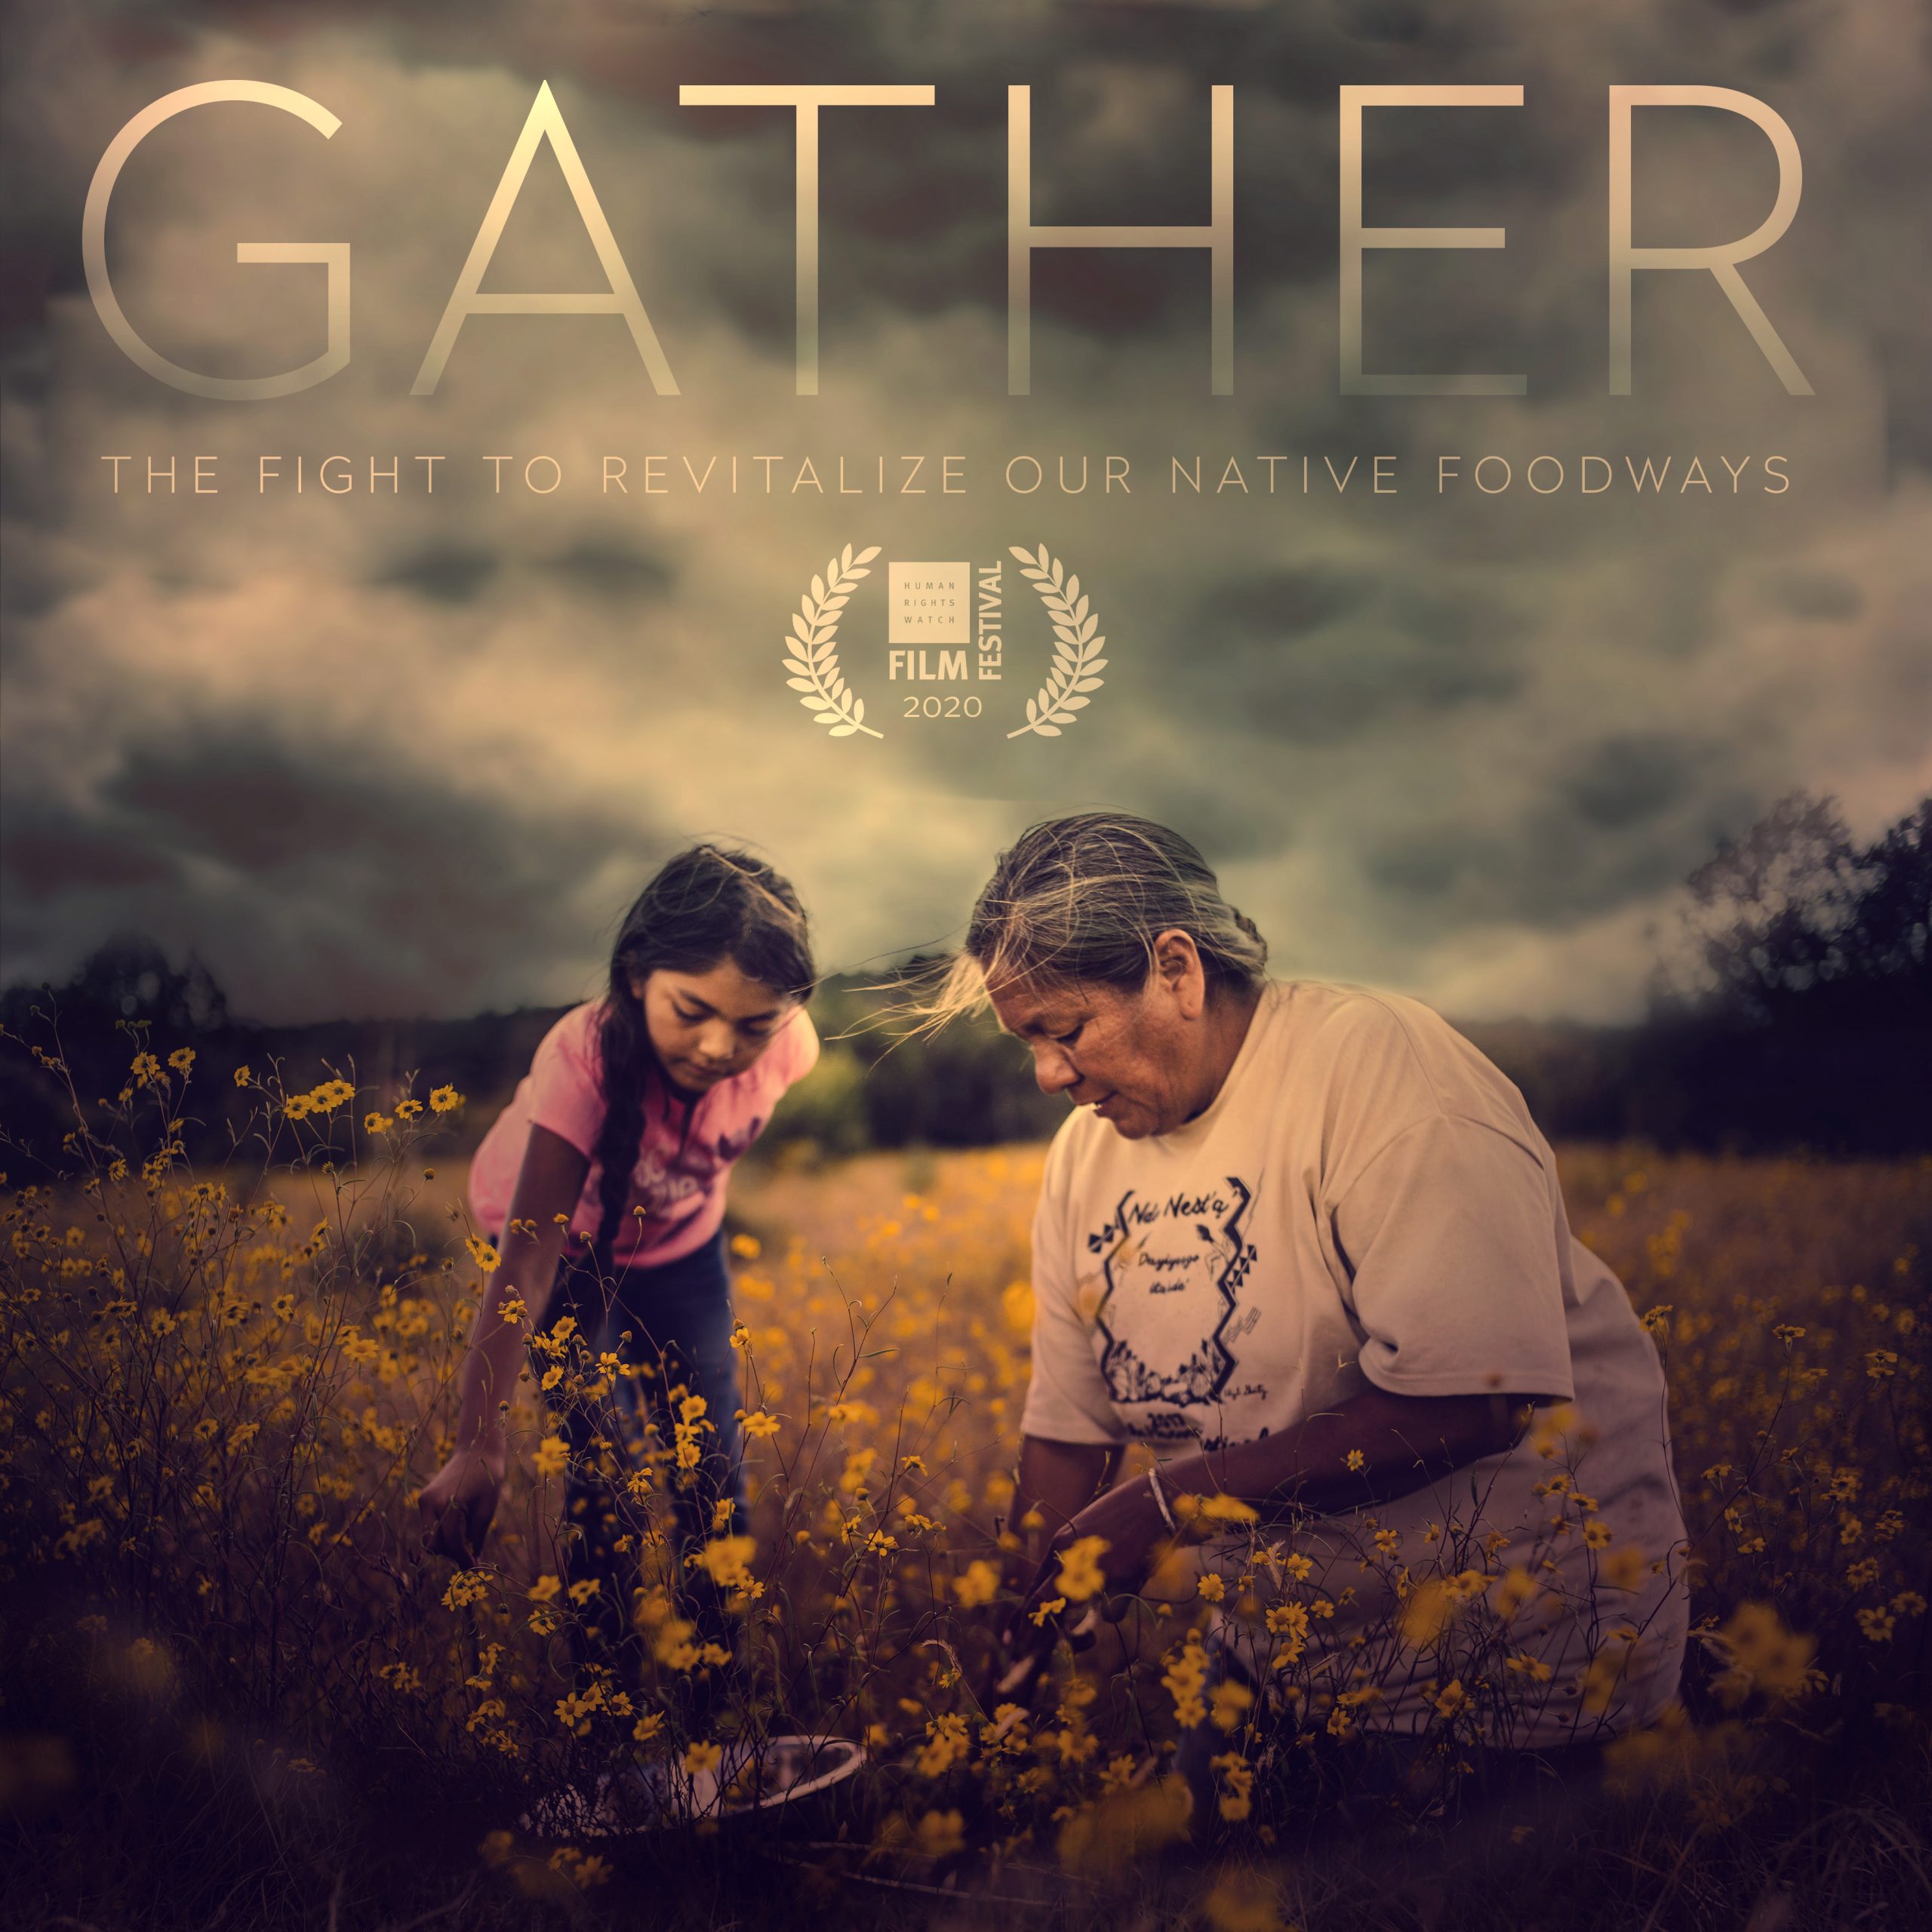 Gather: The fight to revitalize our native foodways